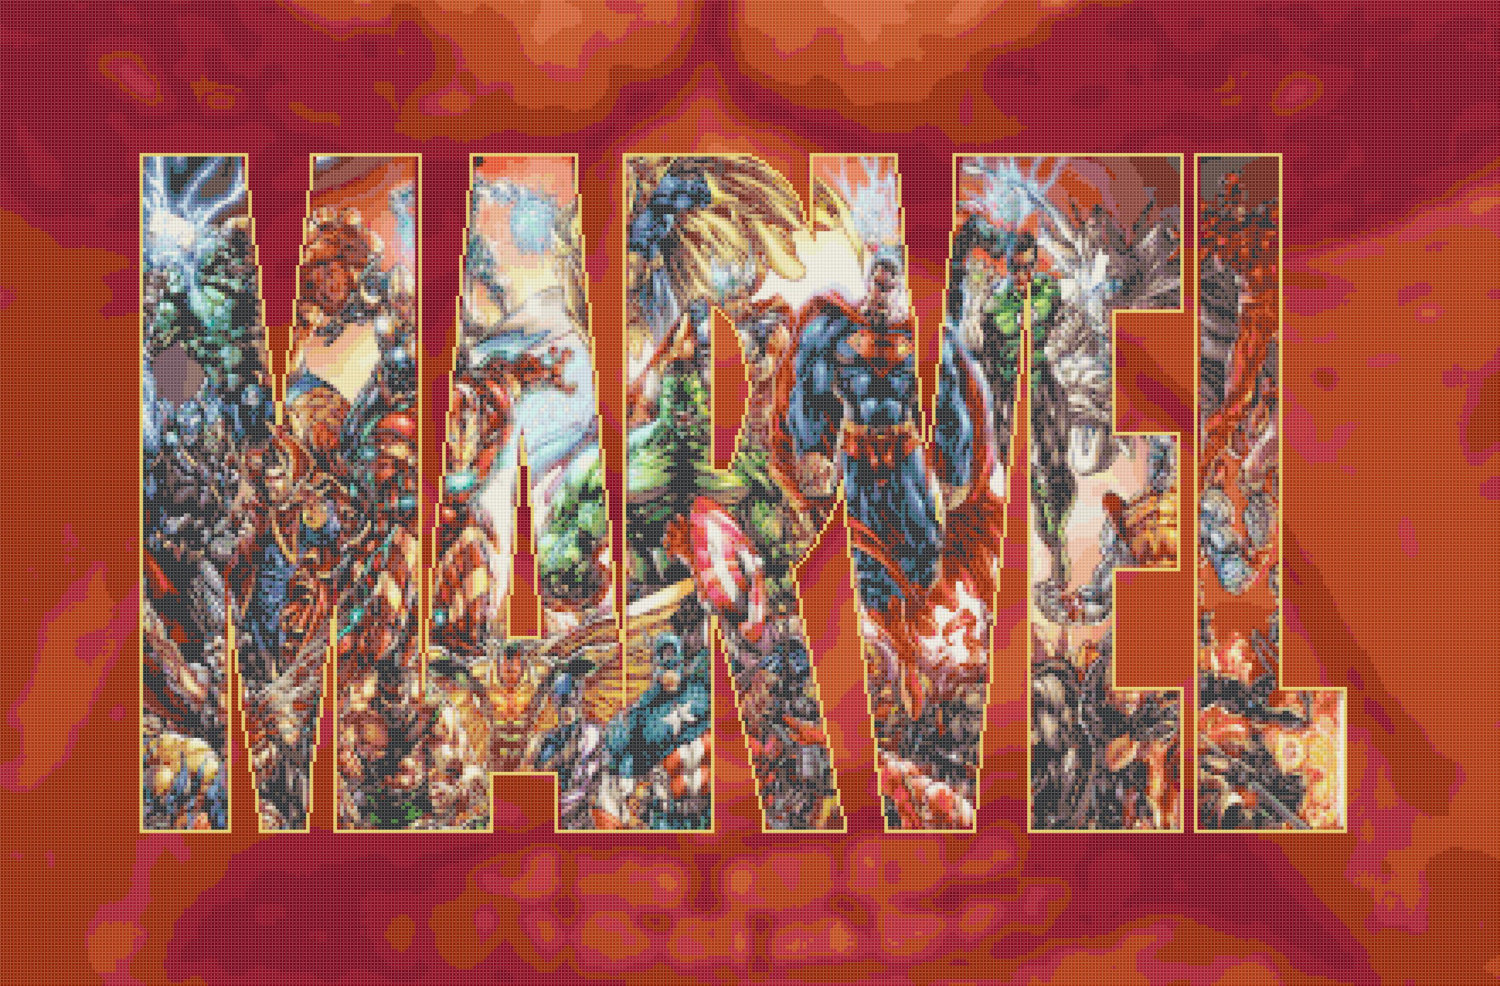 Conted cross stitch pattern marvel logo with characters 441*290 stitches BN952